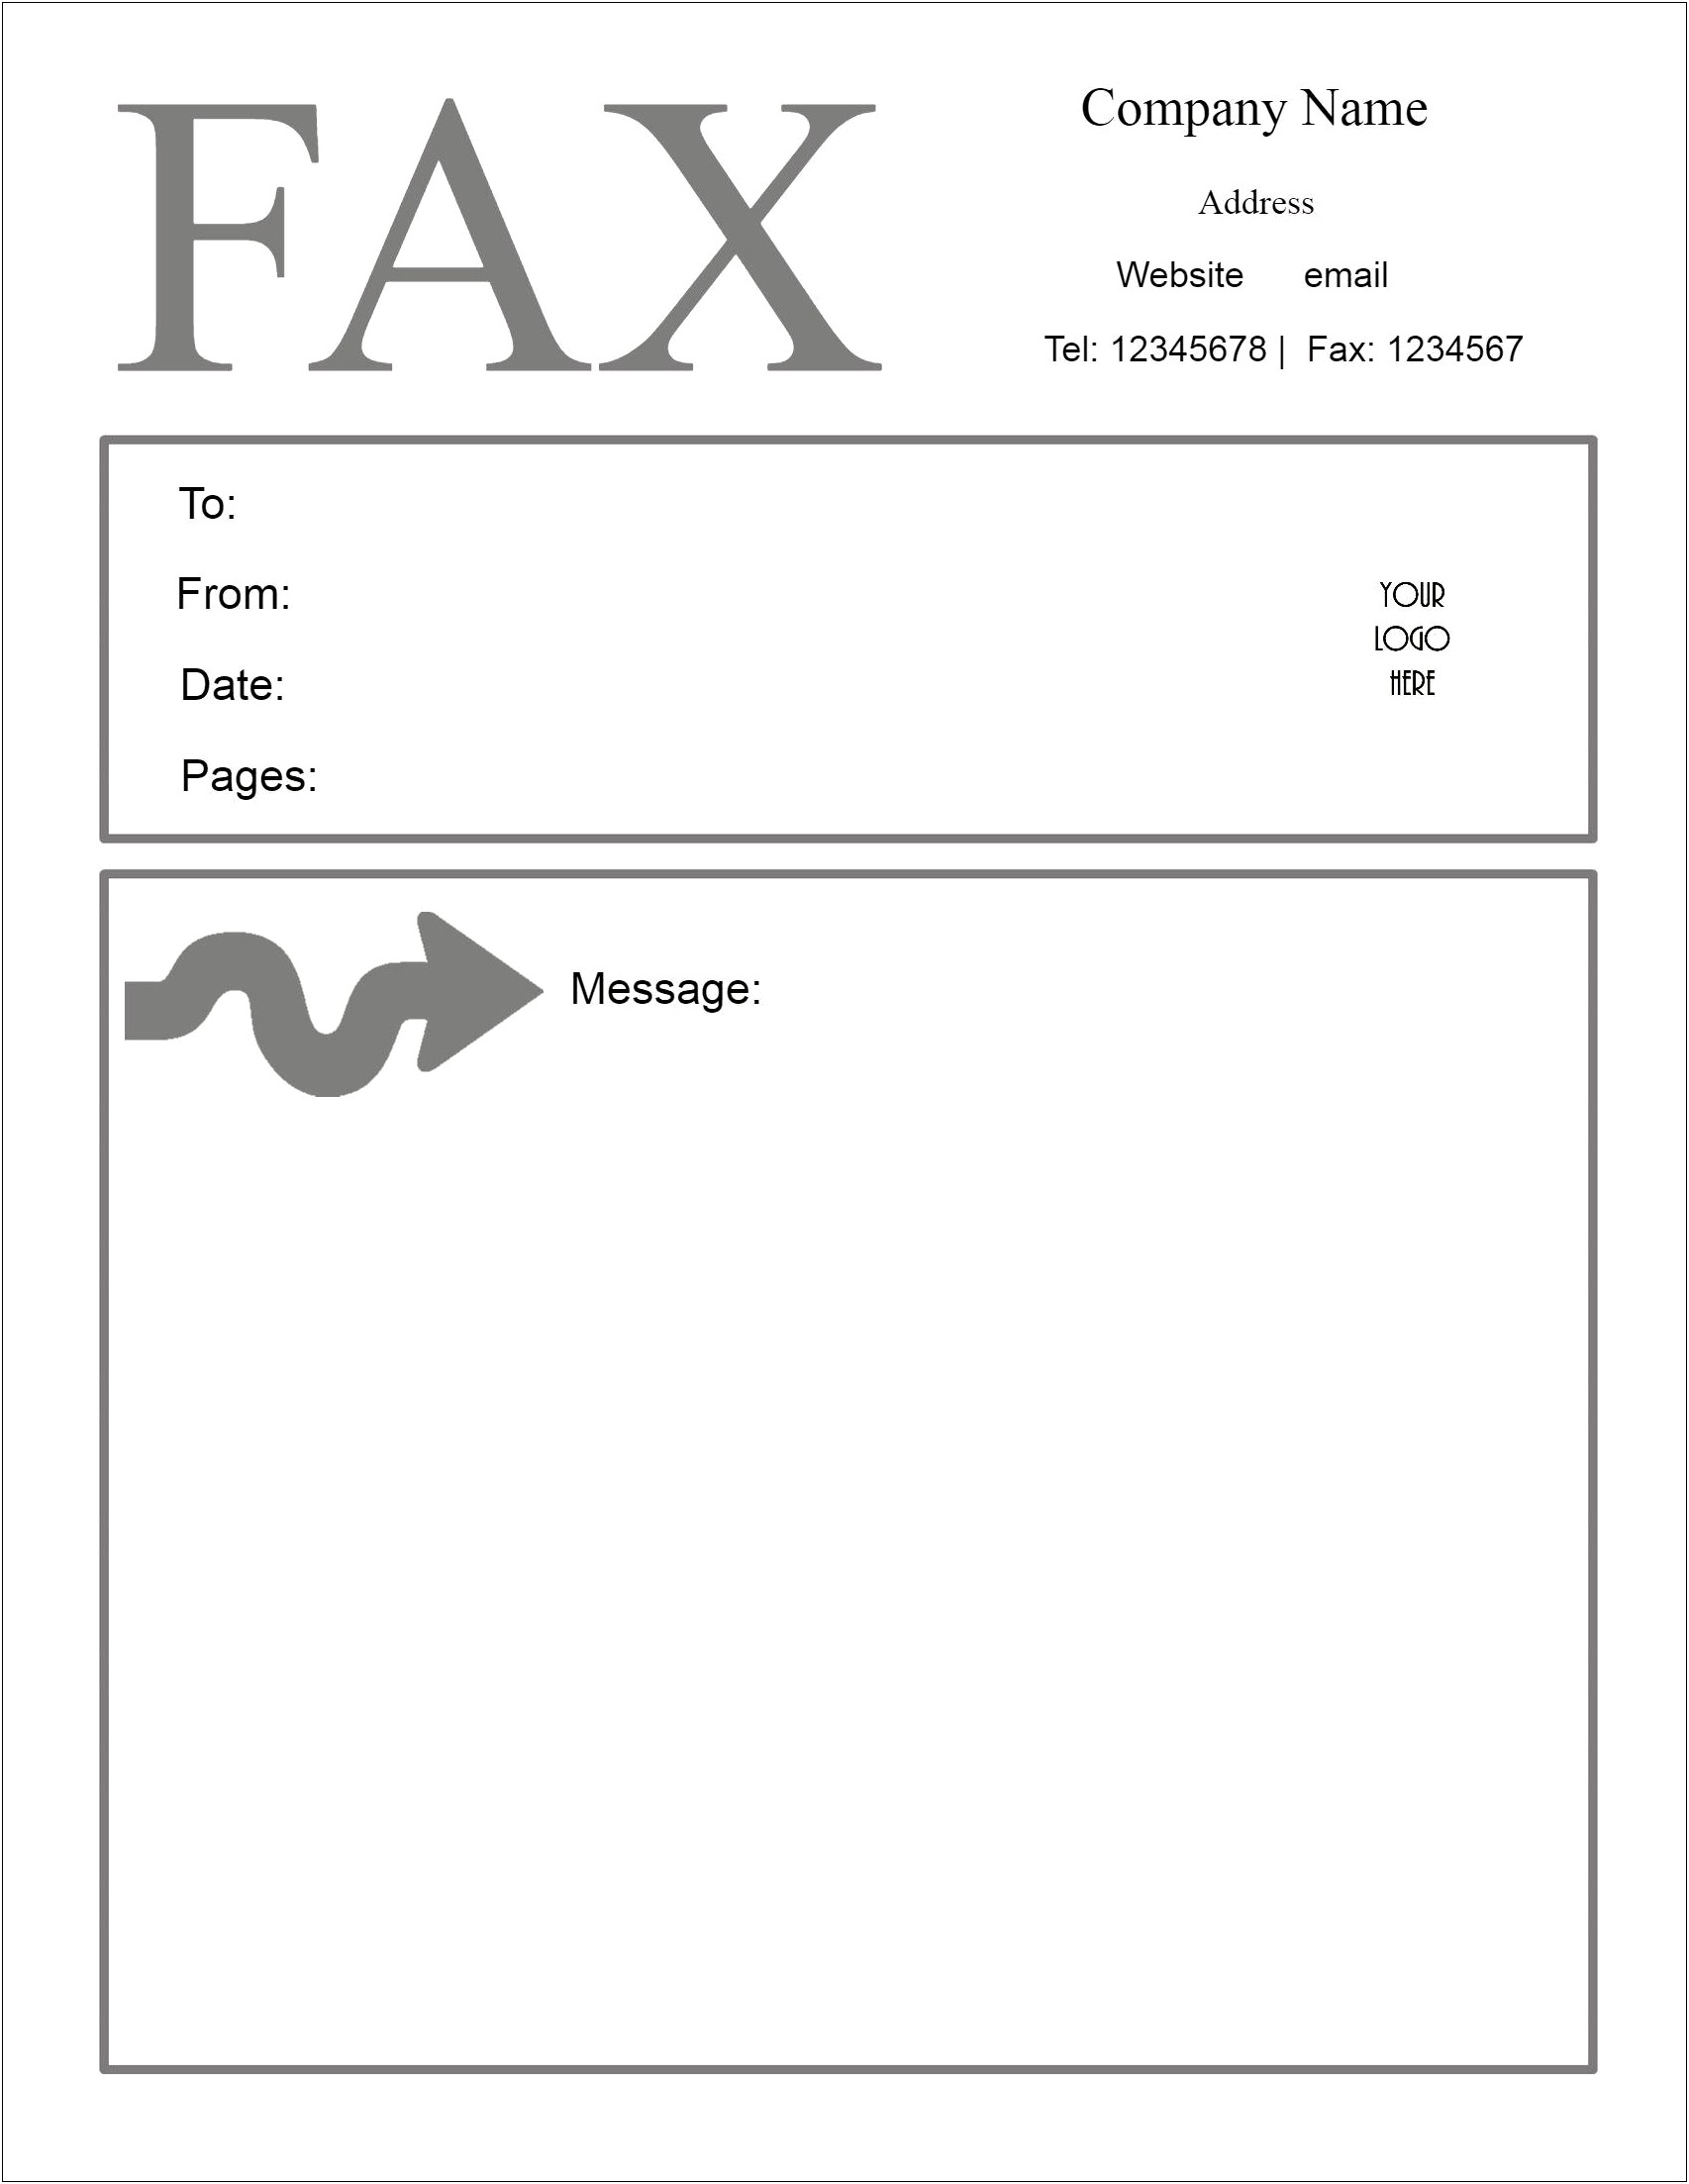 Sample Of Fax Cover Sheet For Resume